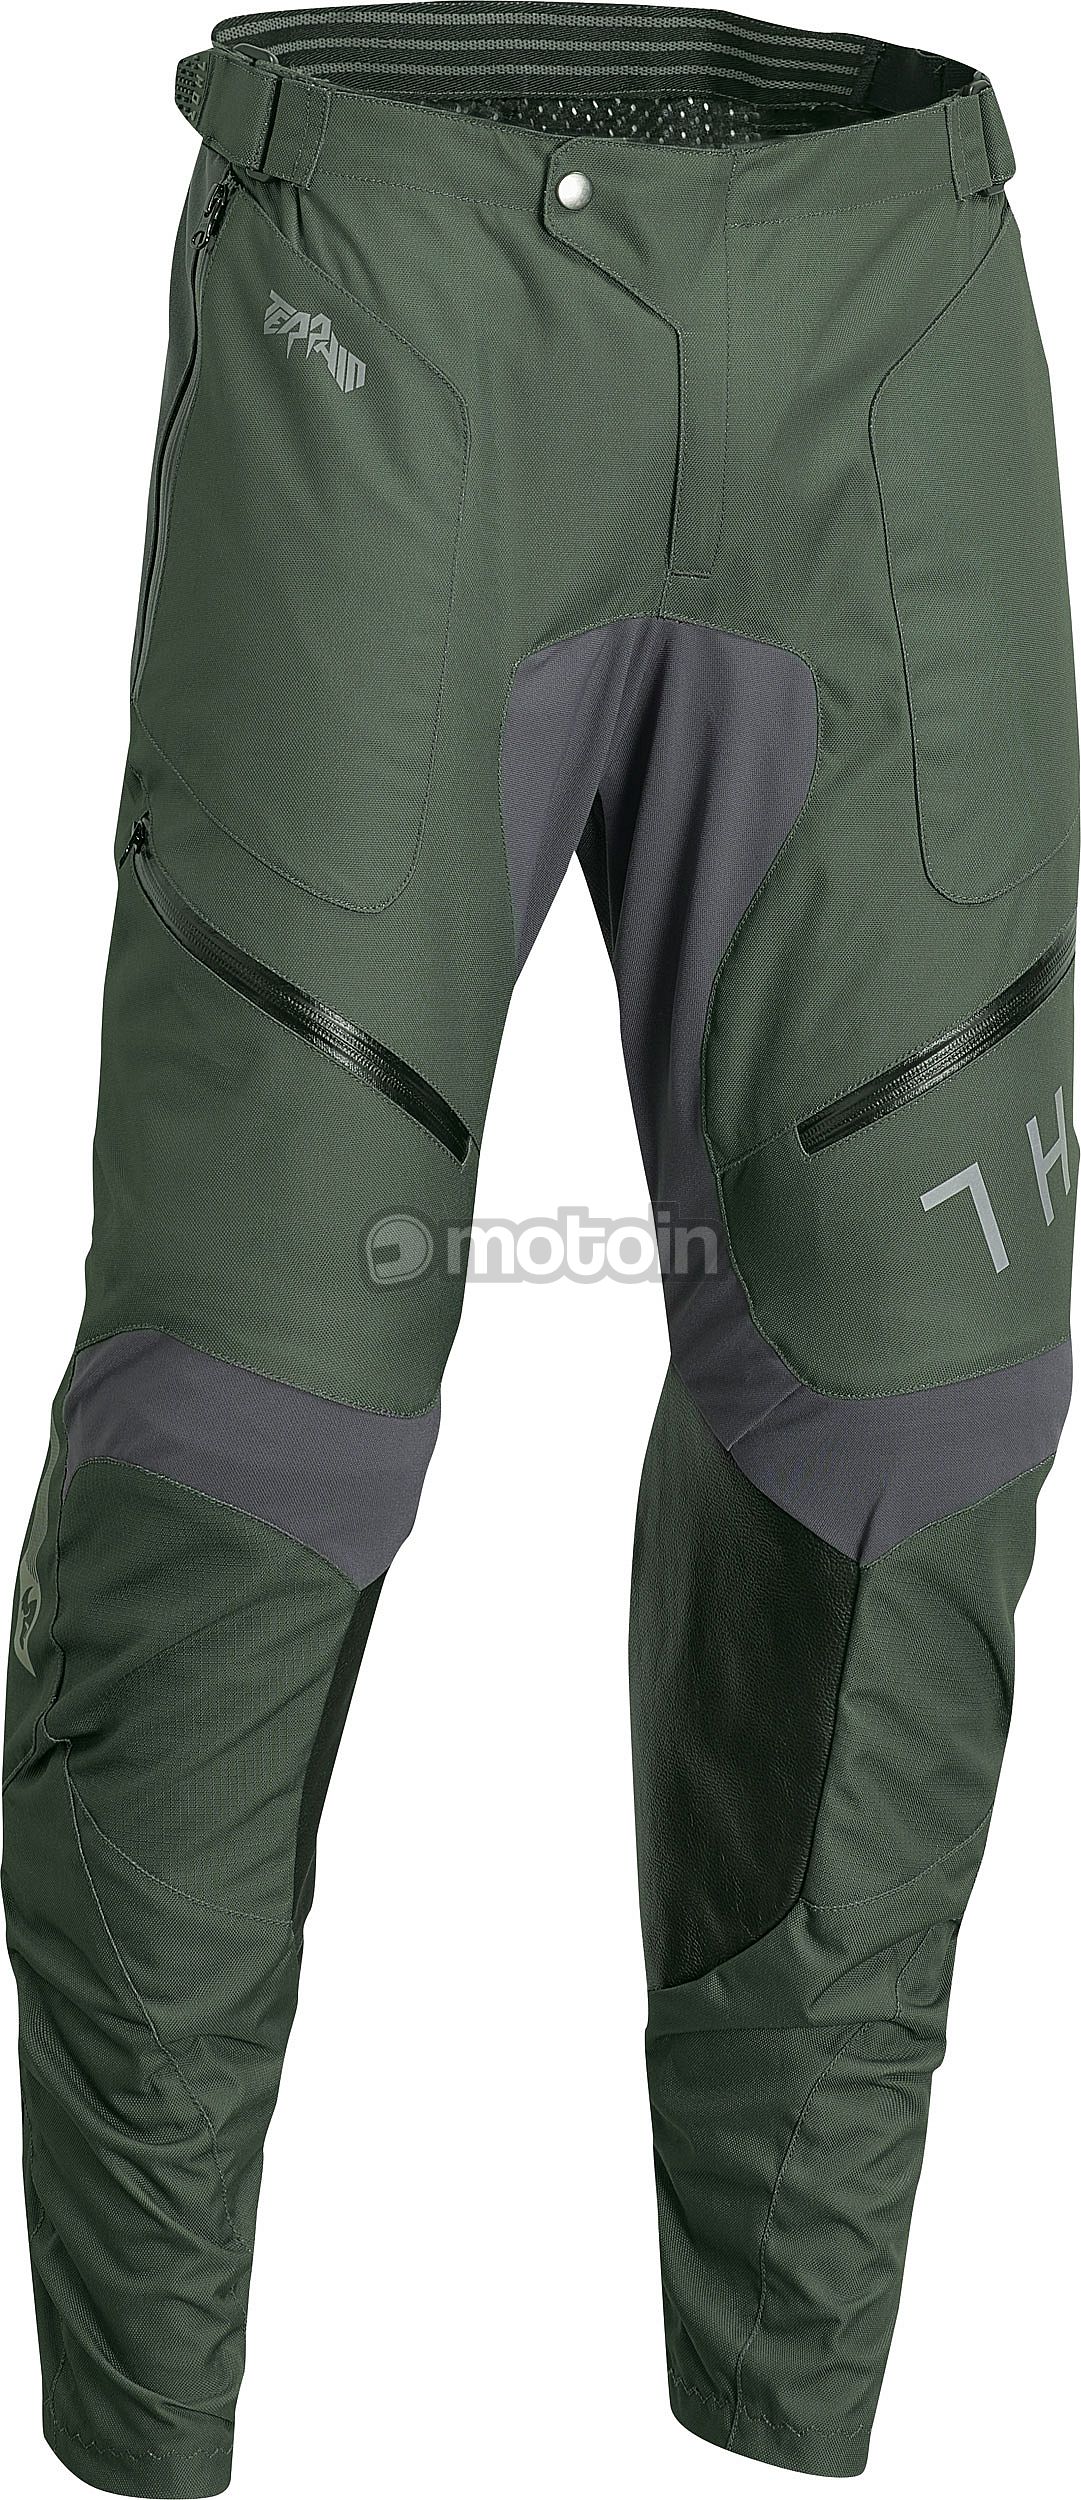 Thor Terrain In The Boot, pantalones textiles impermeables